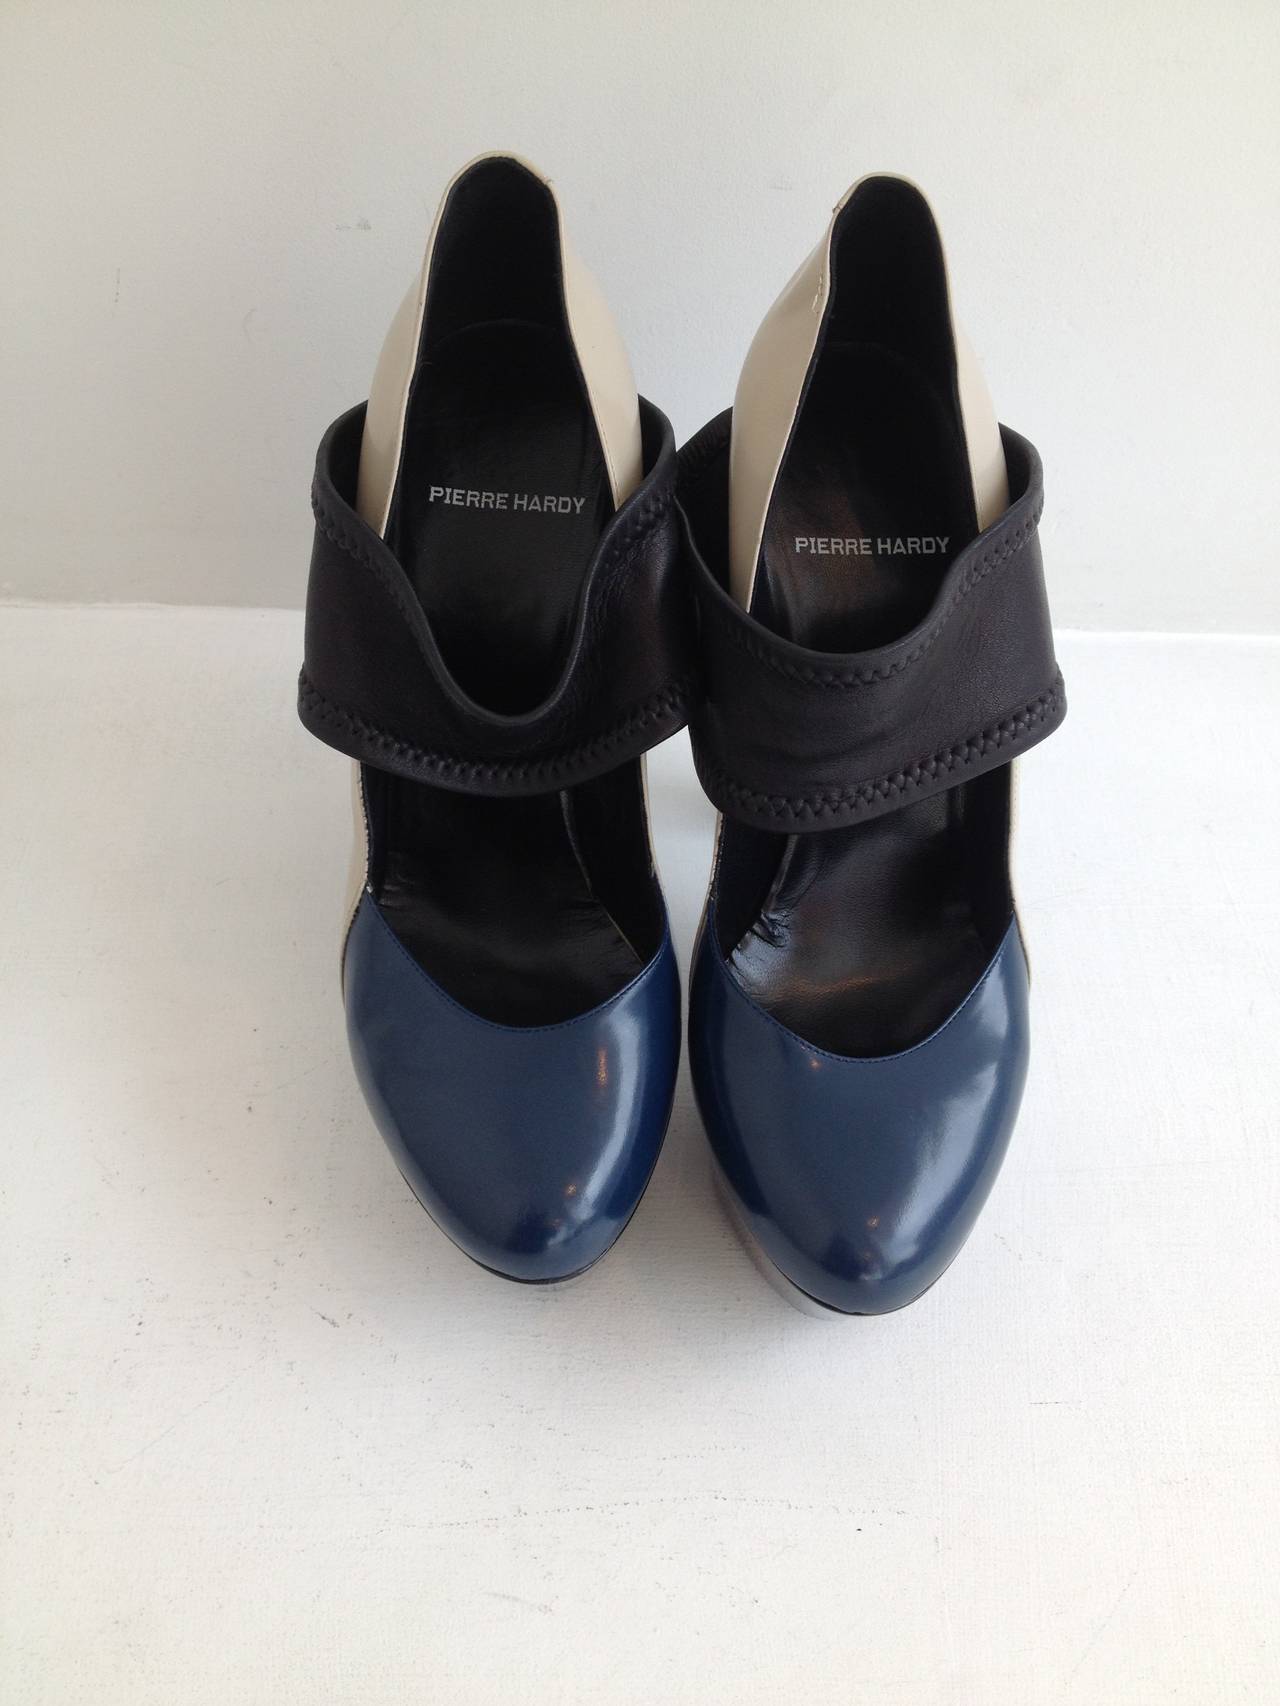 These heels are so wild! The colorblocked body of the shoe features a light French grey heel and sides and a Prussian blue almond toe. The shoe rests on a 1.5 inch platform, in super glossy black plastic, with a towering 6 inch heel in matte steel